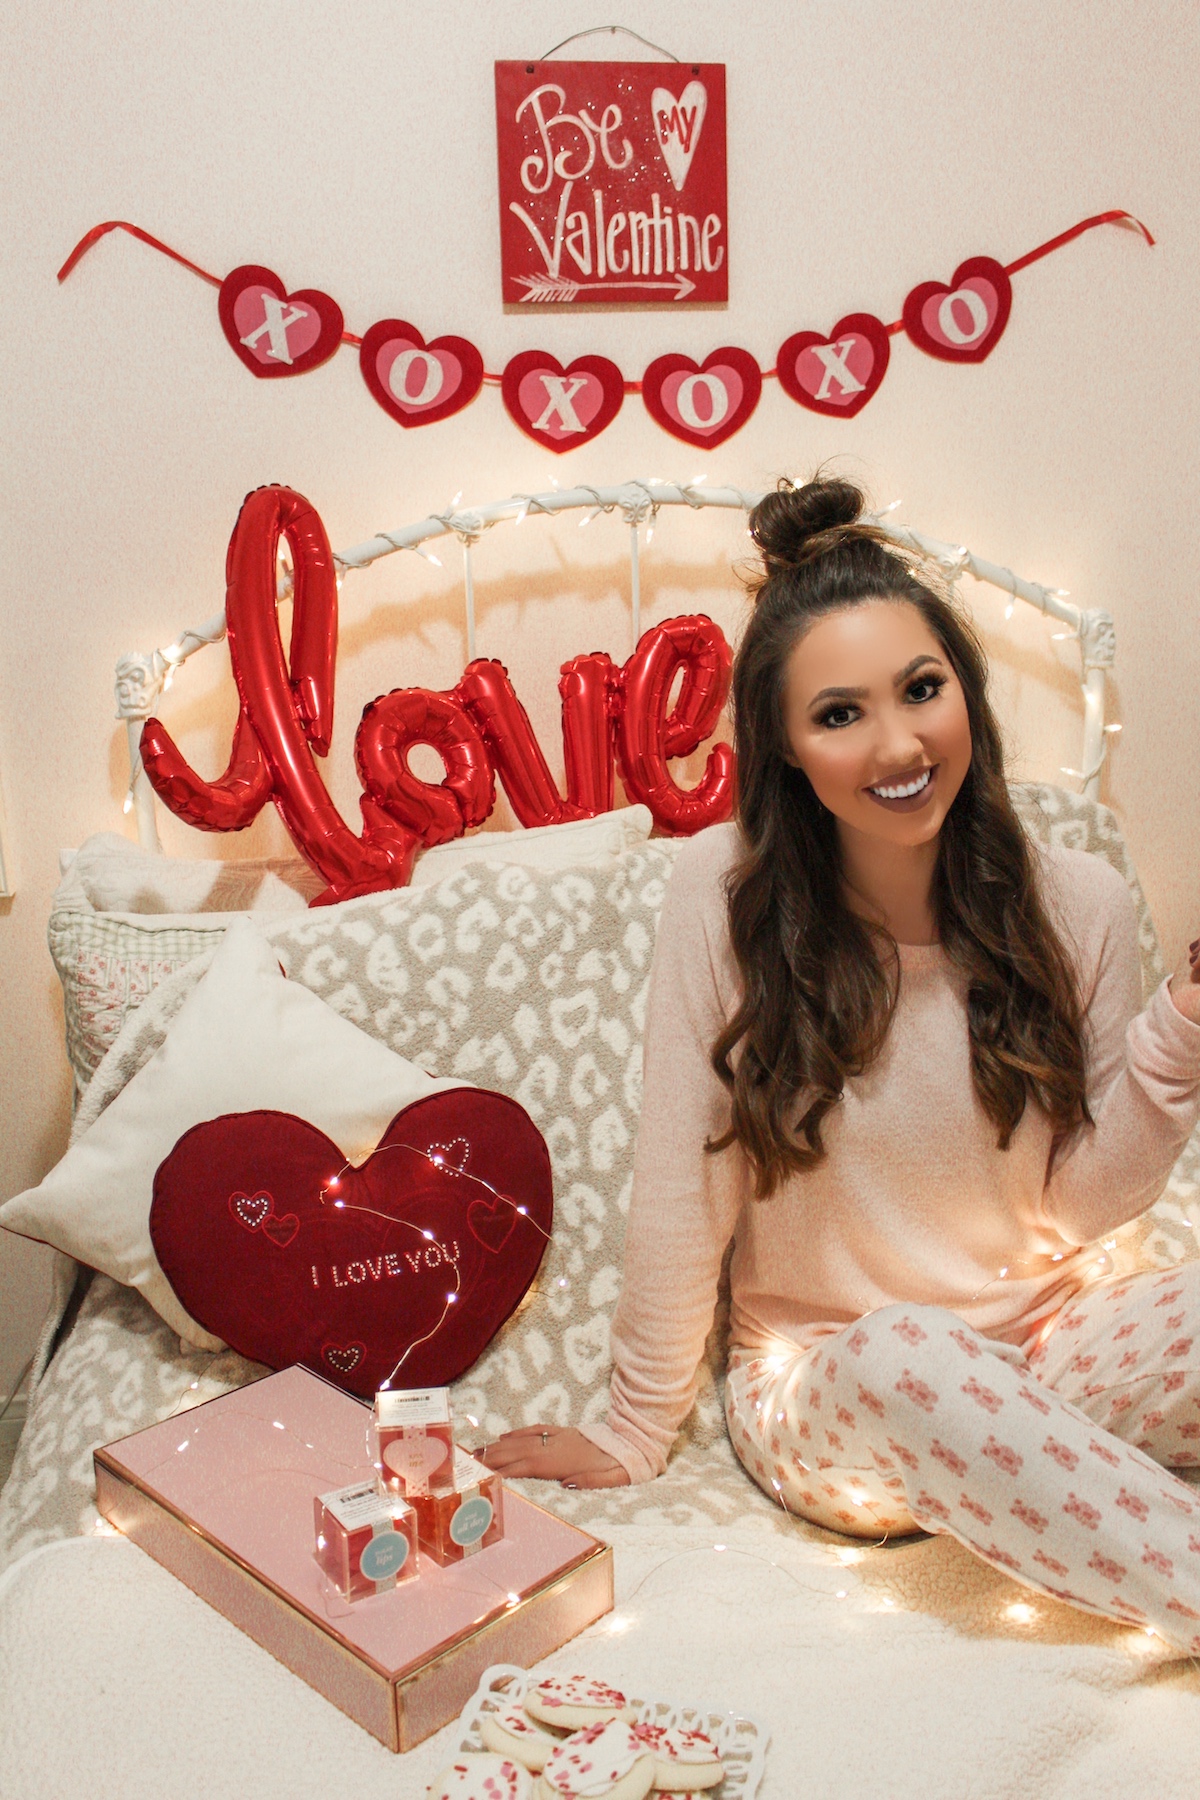 9 Things to do on Valentine's Day as a Single Gal | My Styled Life1200 x 1800